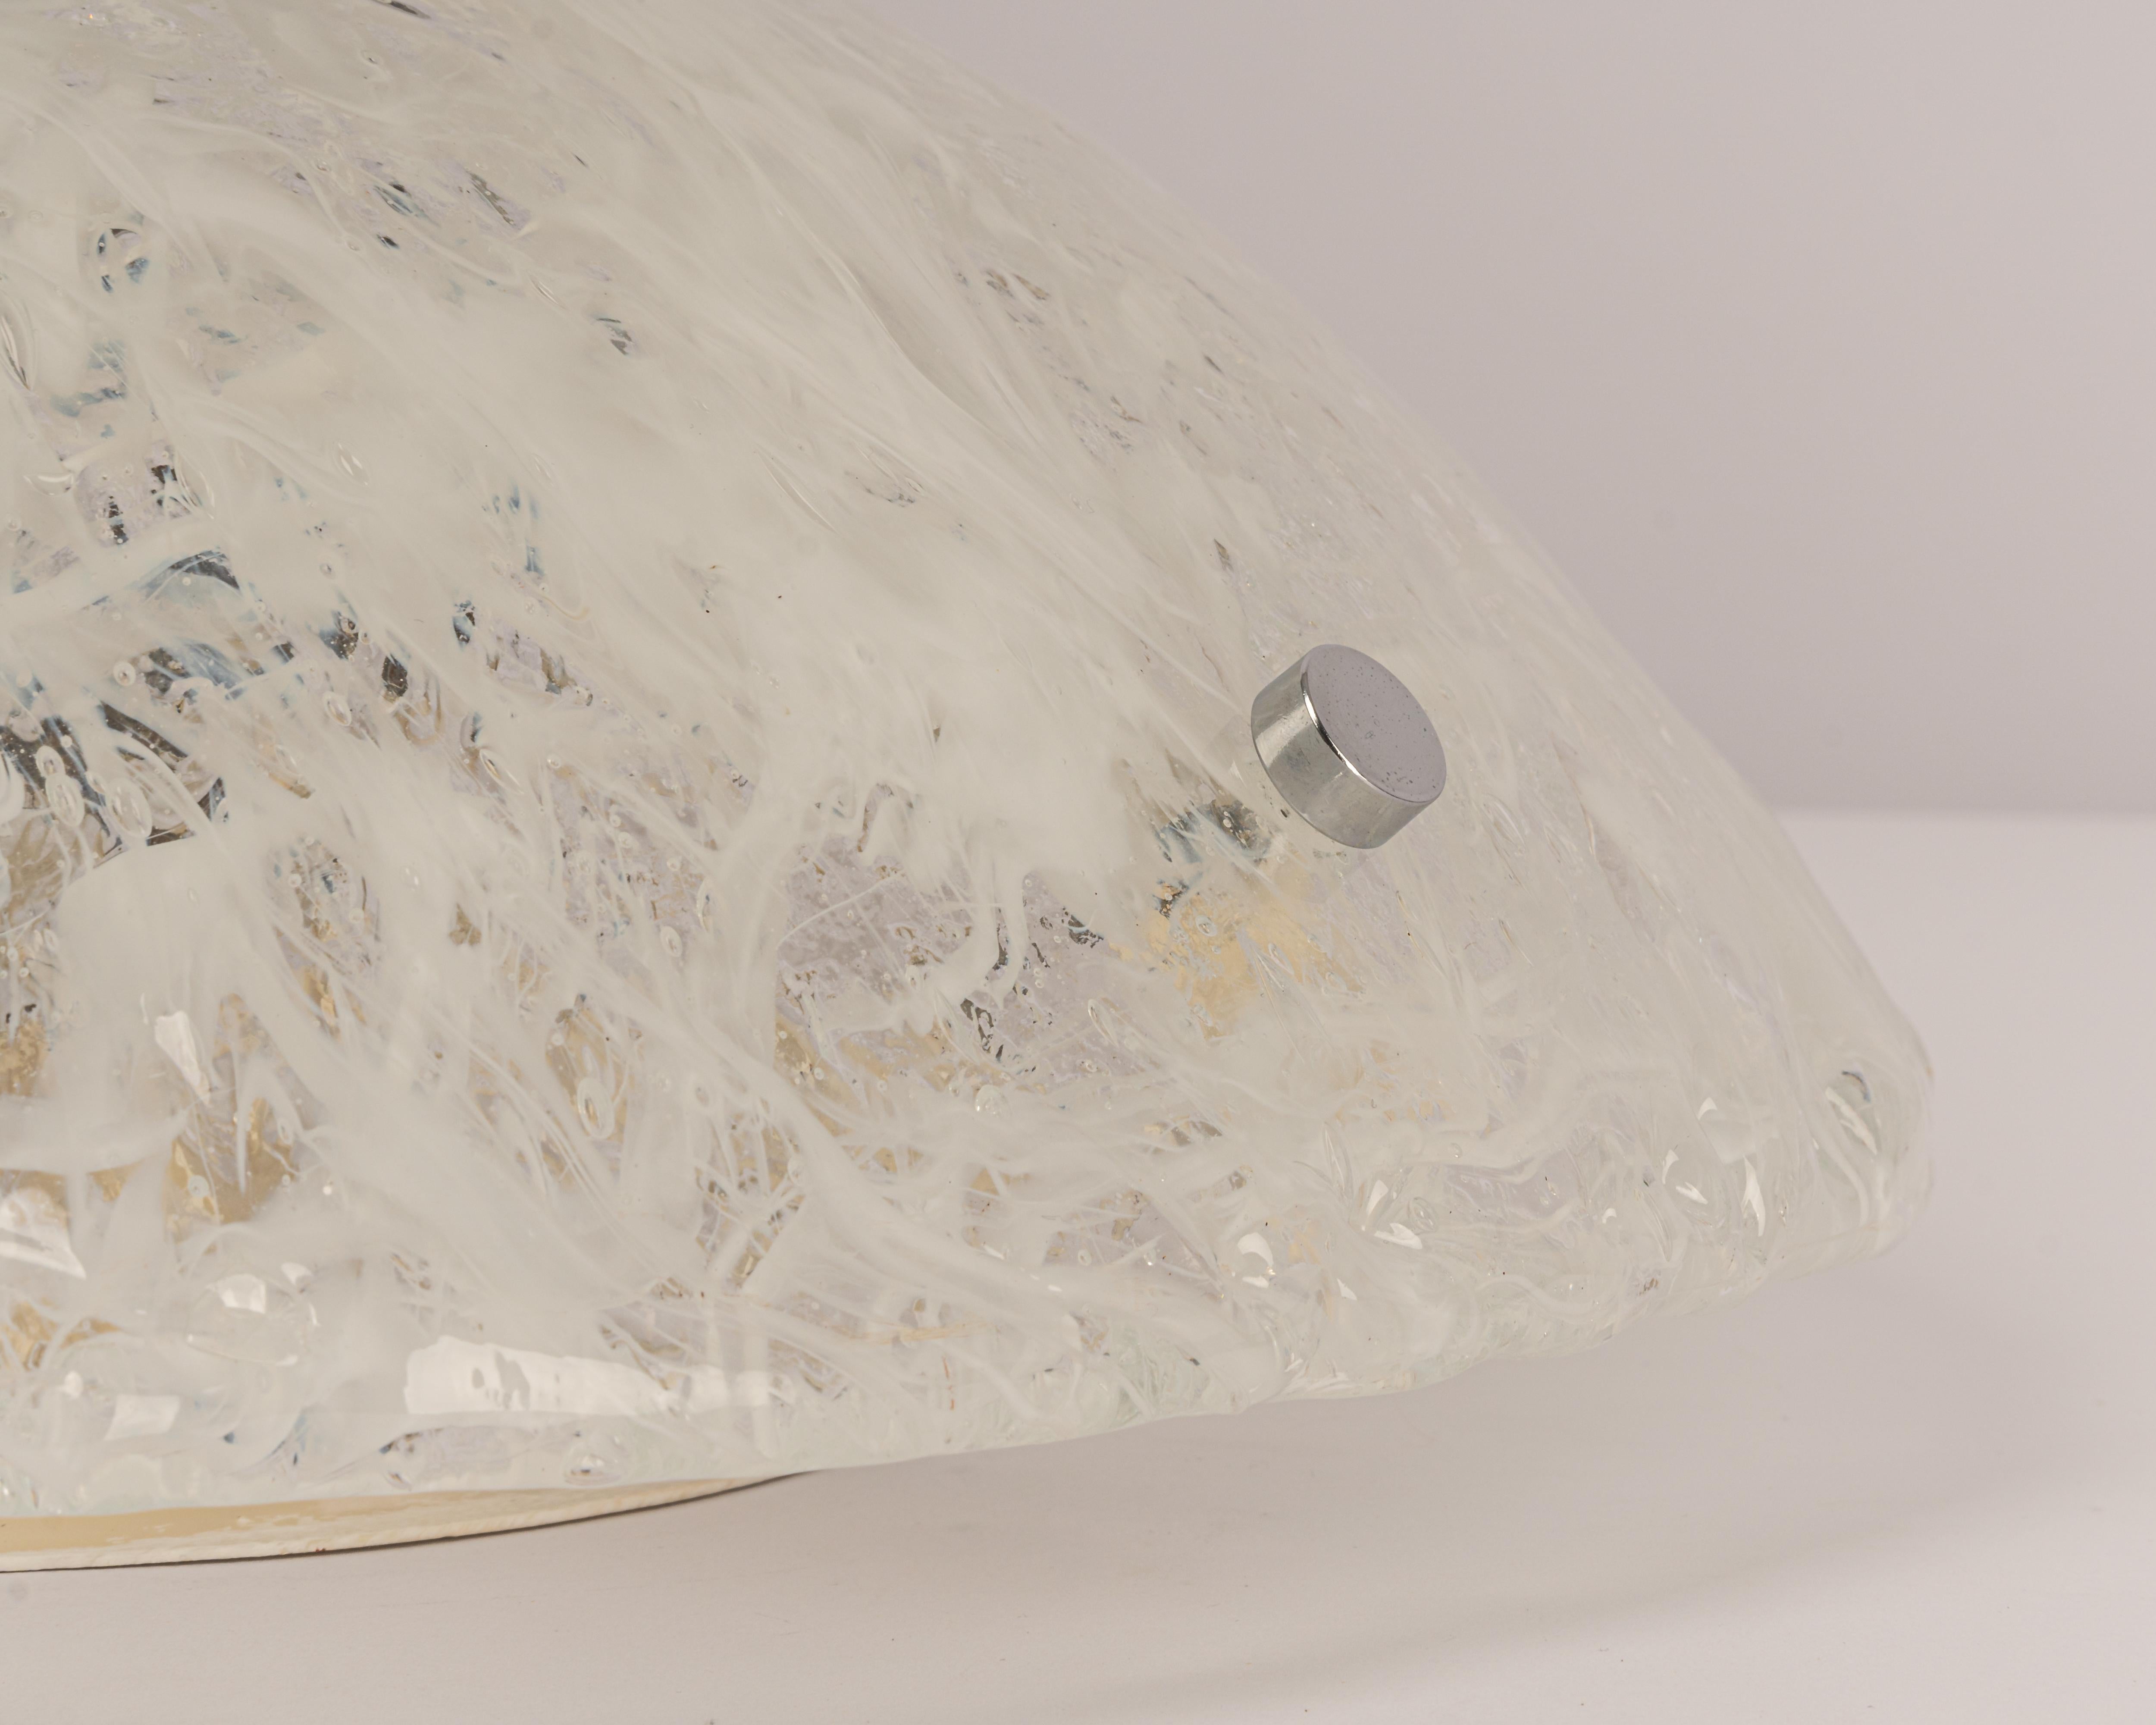 1 of 2 Large Venini Ceiling Lights Attributed to Carlo Scarpa for Venini, 1950s For Sale 6